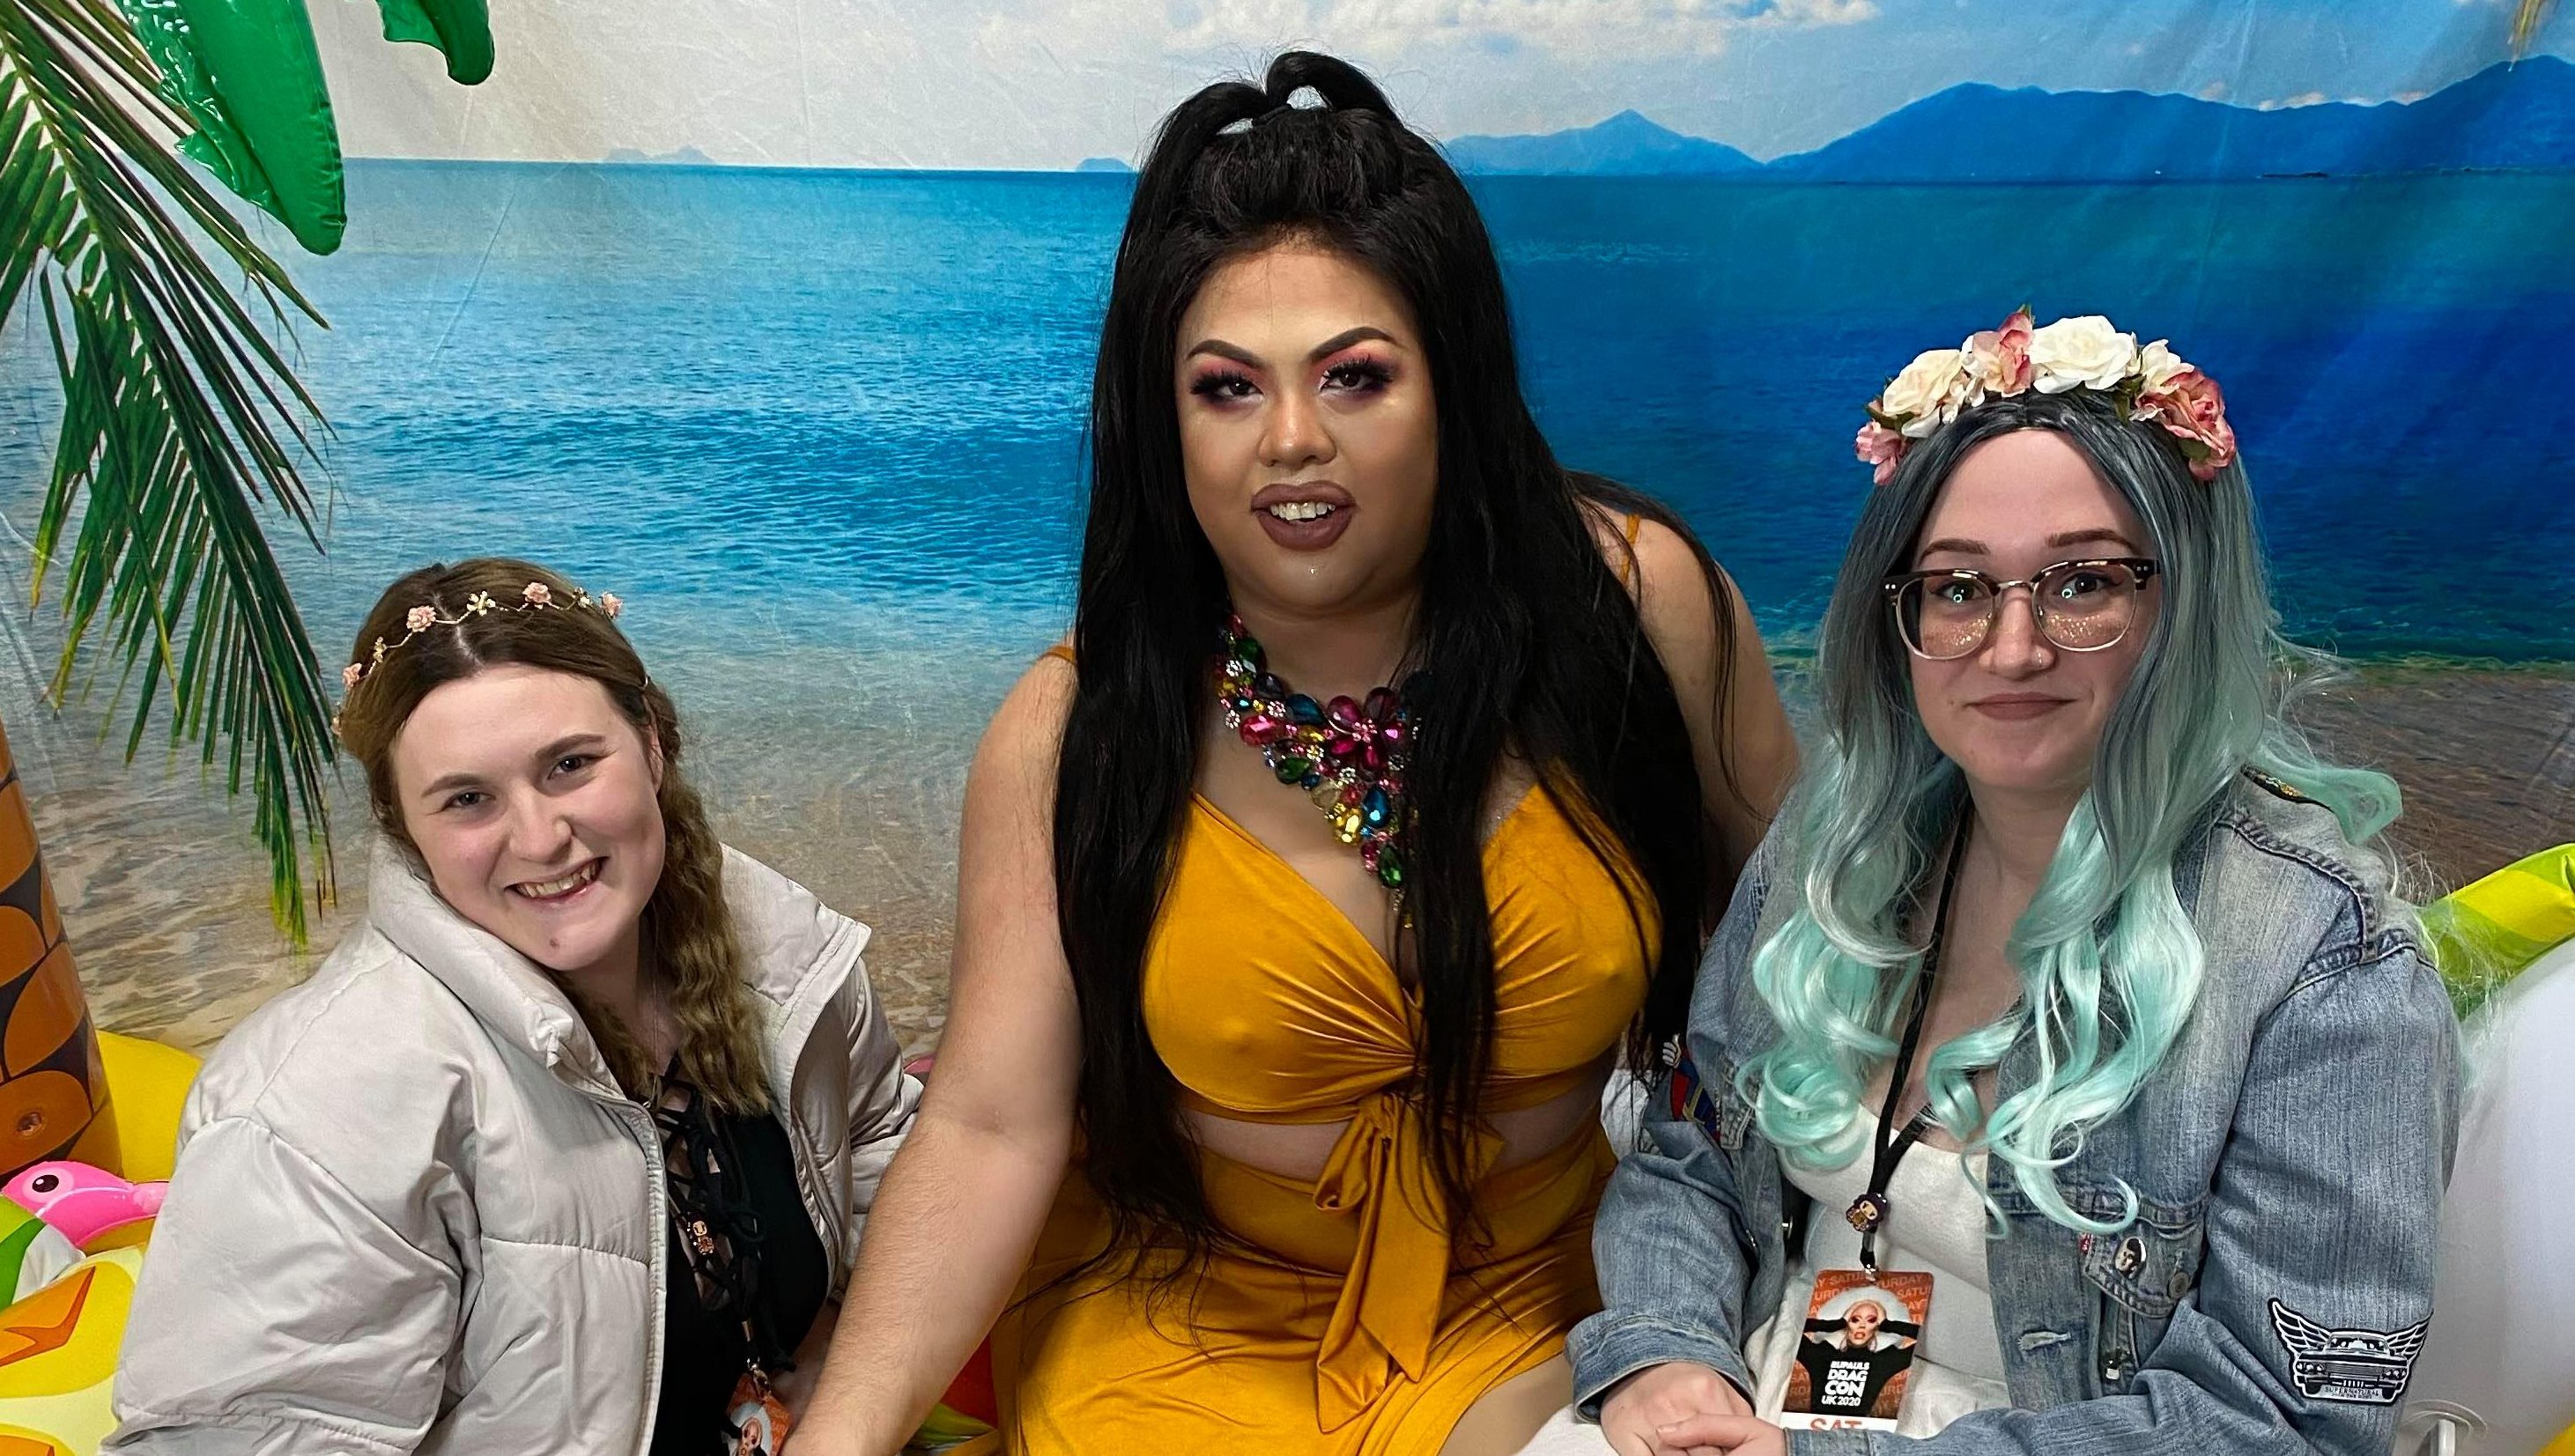 KU student gifts friend DragCon ticket for her birthday